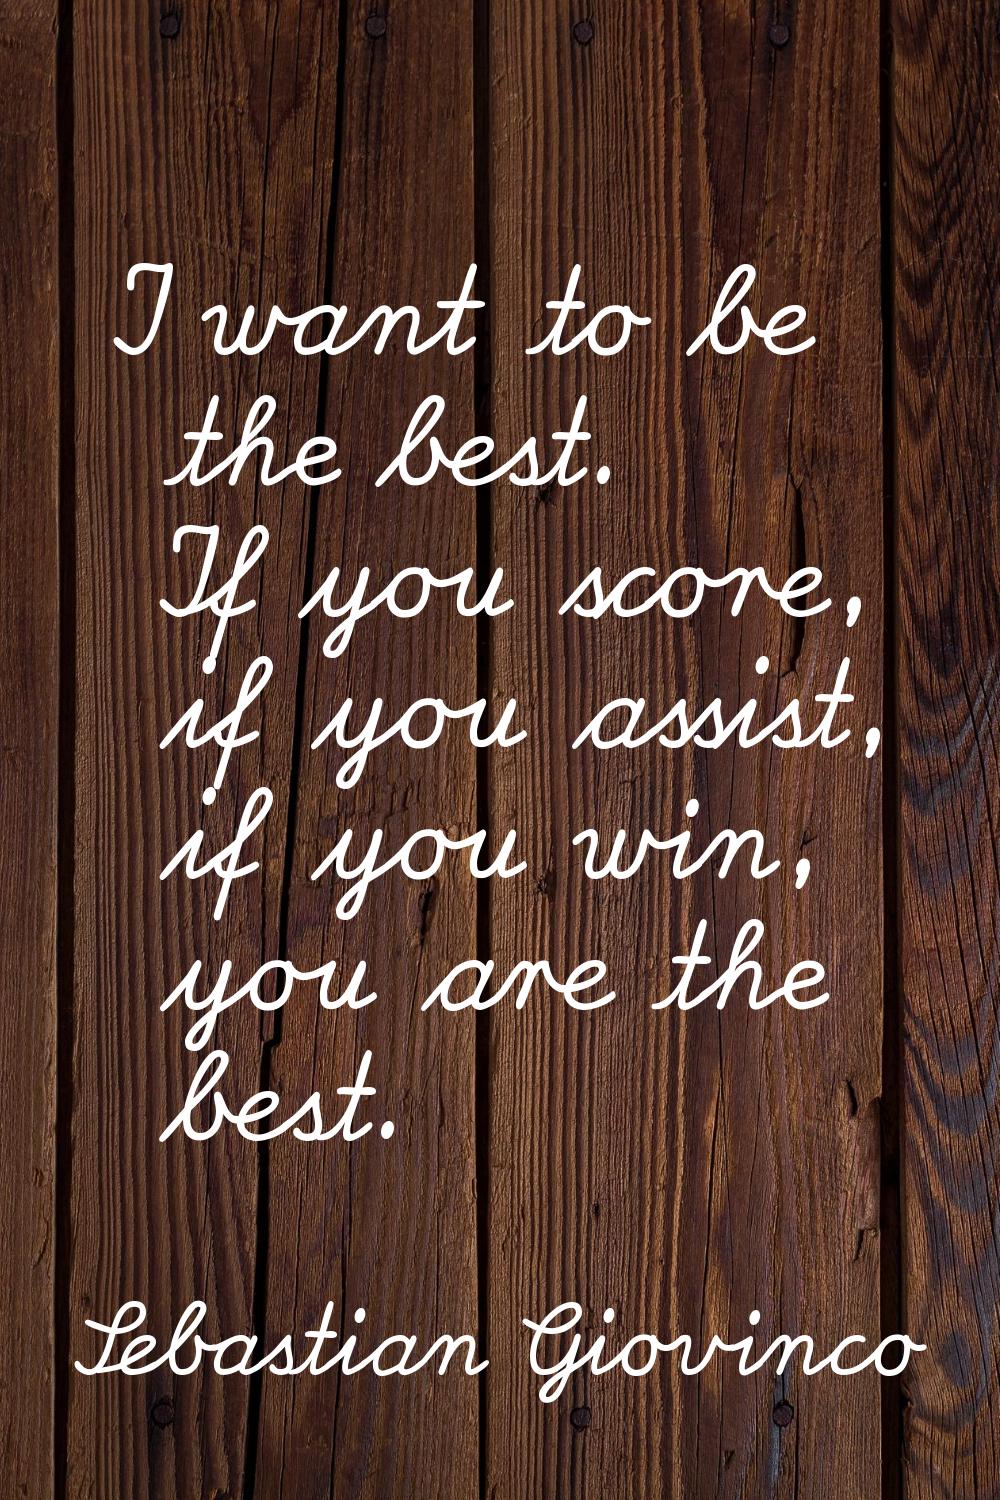 I want to be the best. If you score, if you assist, if you win, you are the best.